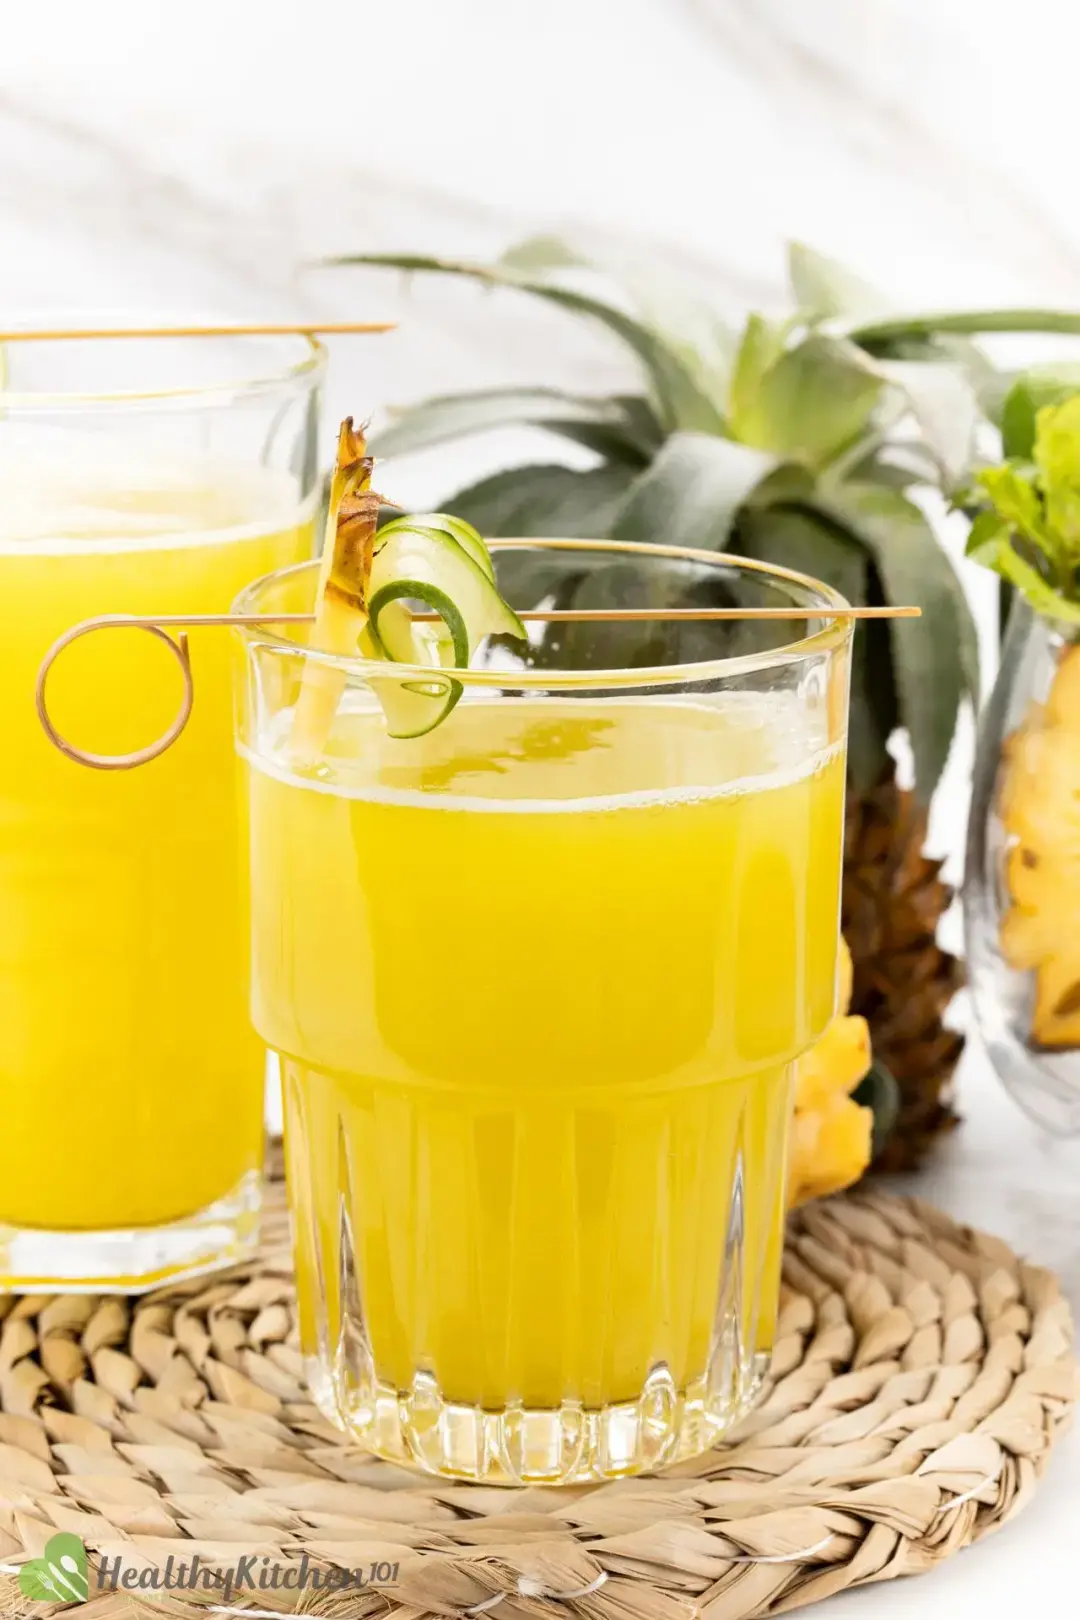 What Is Pineapple and Cucumber Juice Good For